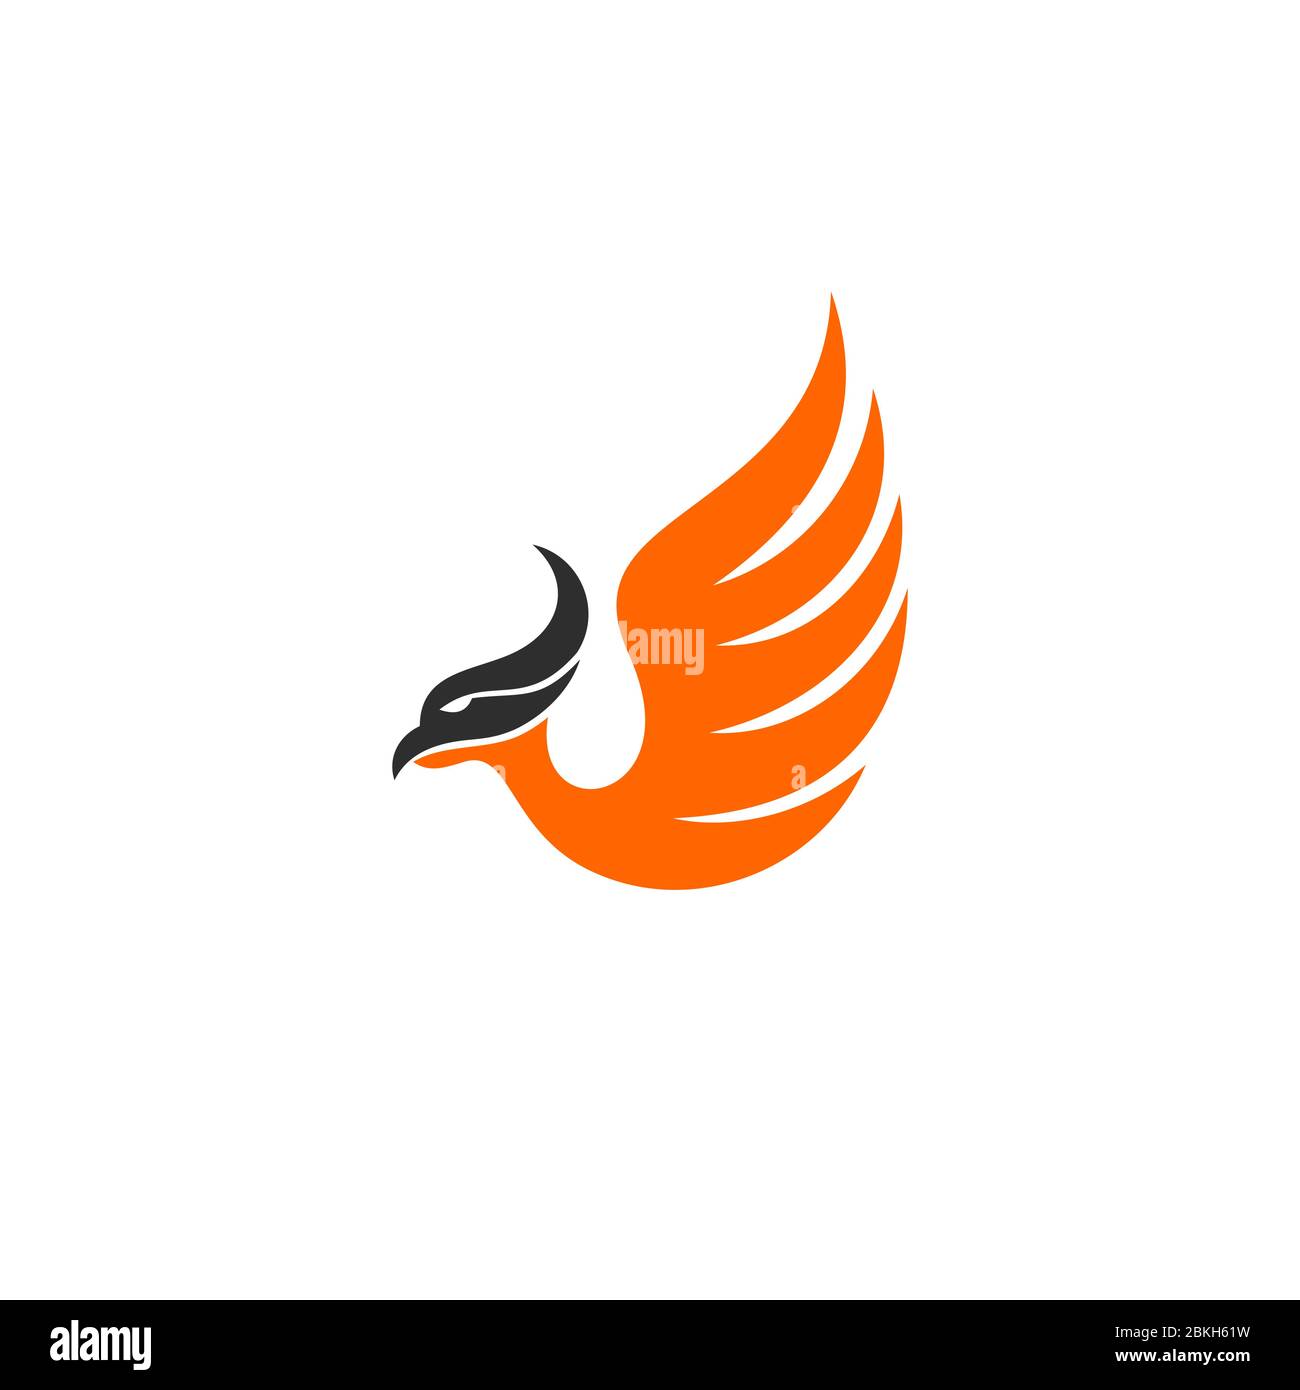 Flying phoenix bird graphic logo design concept template, isolated on white background. Stock Vector